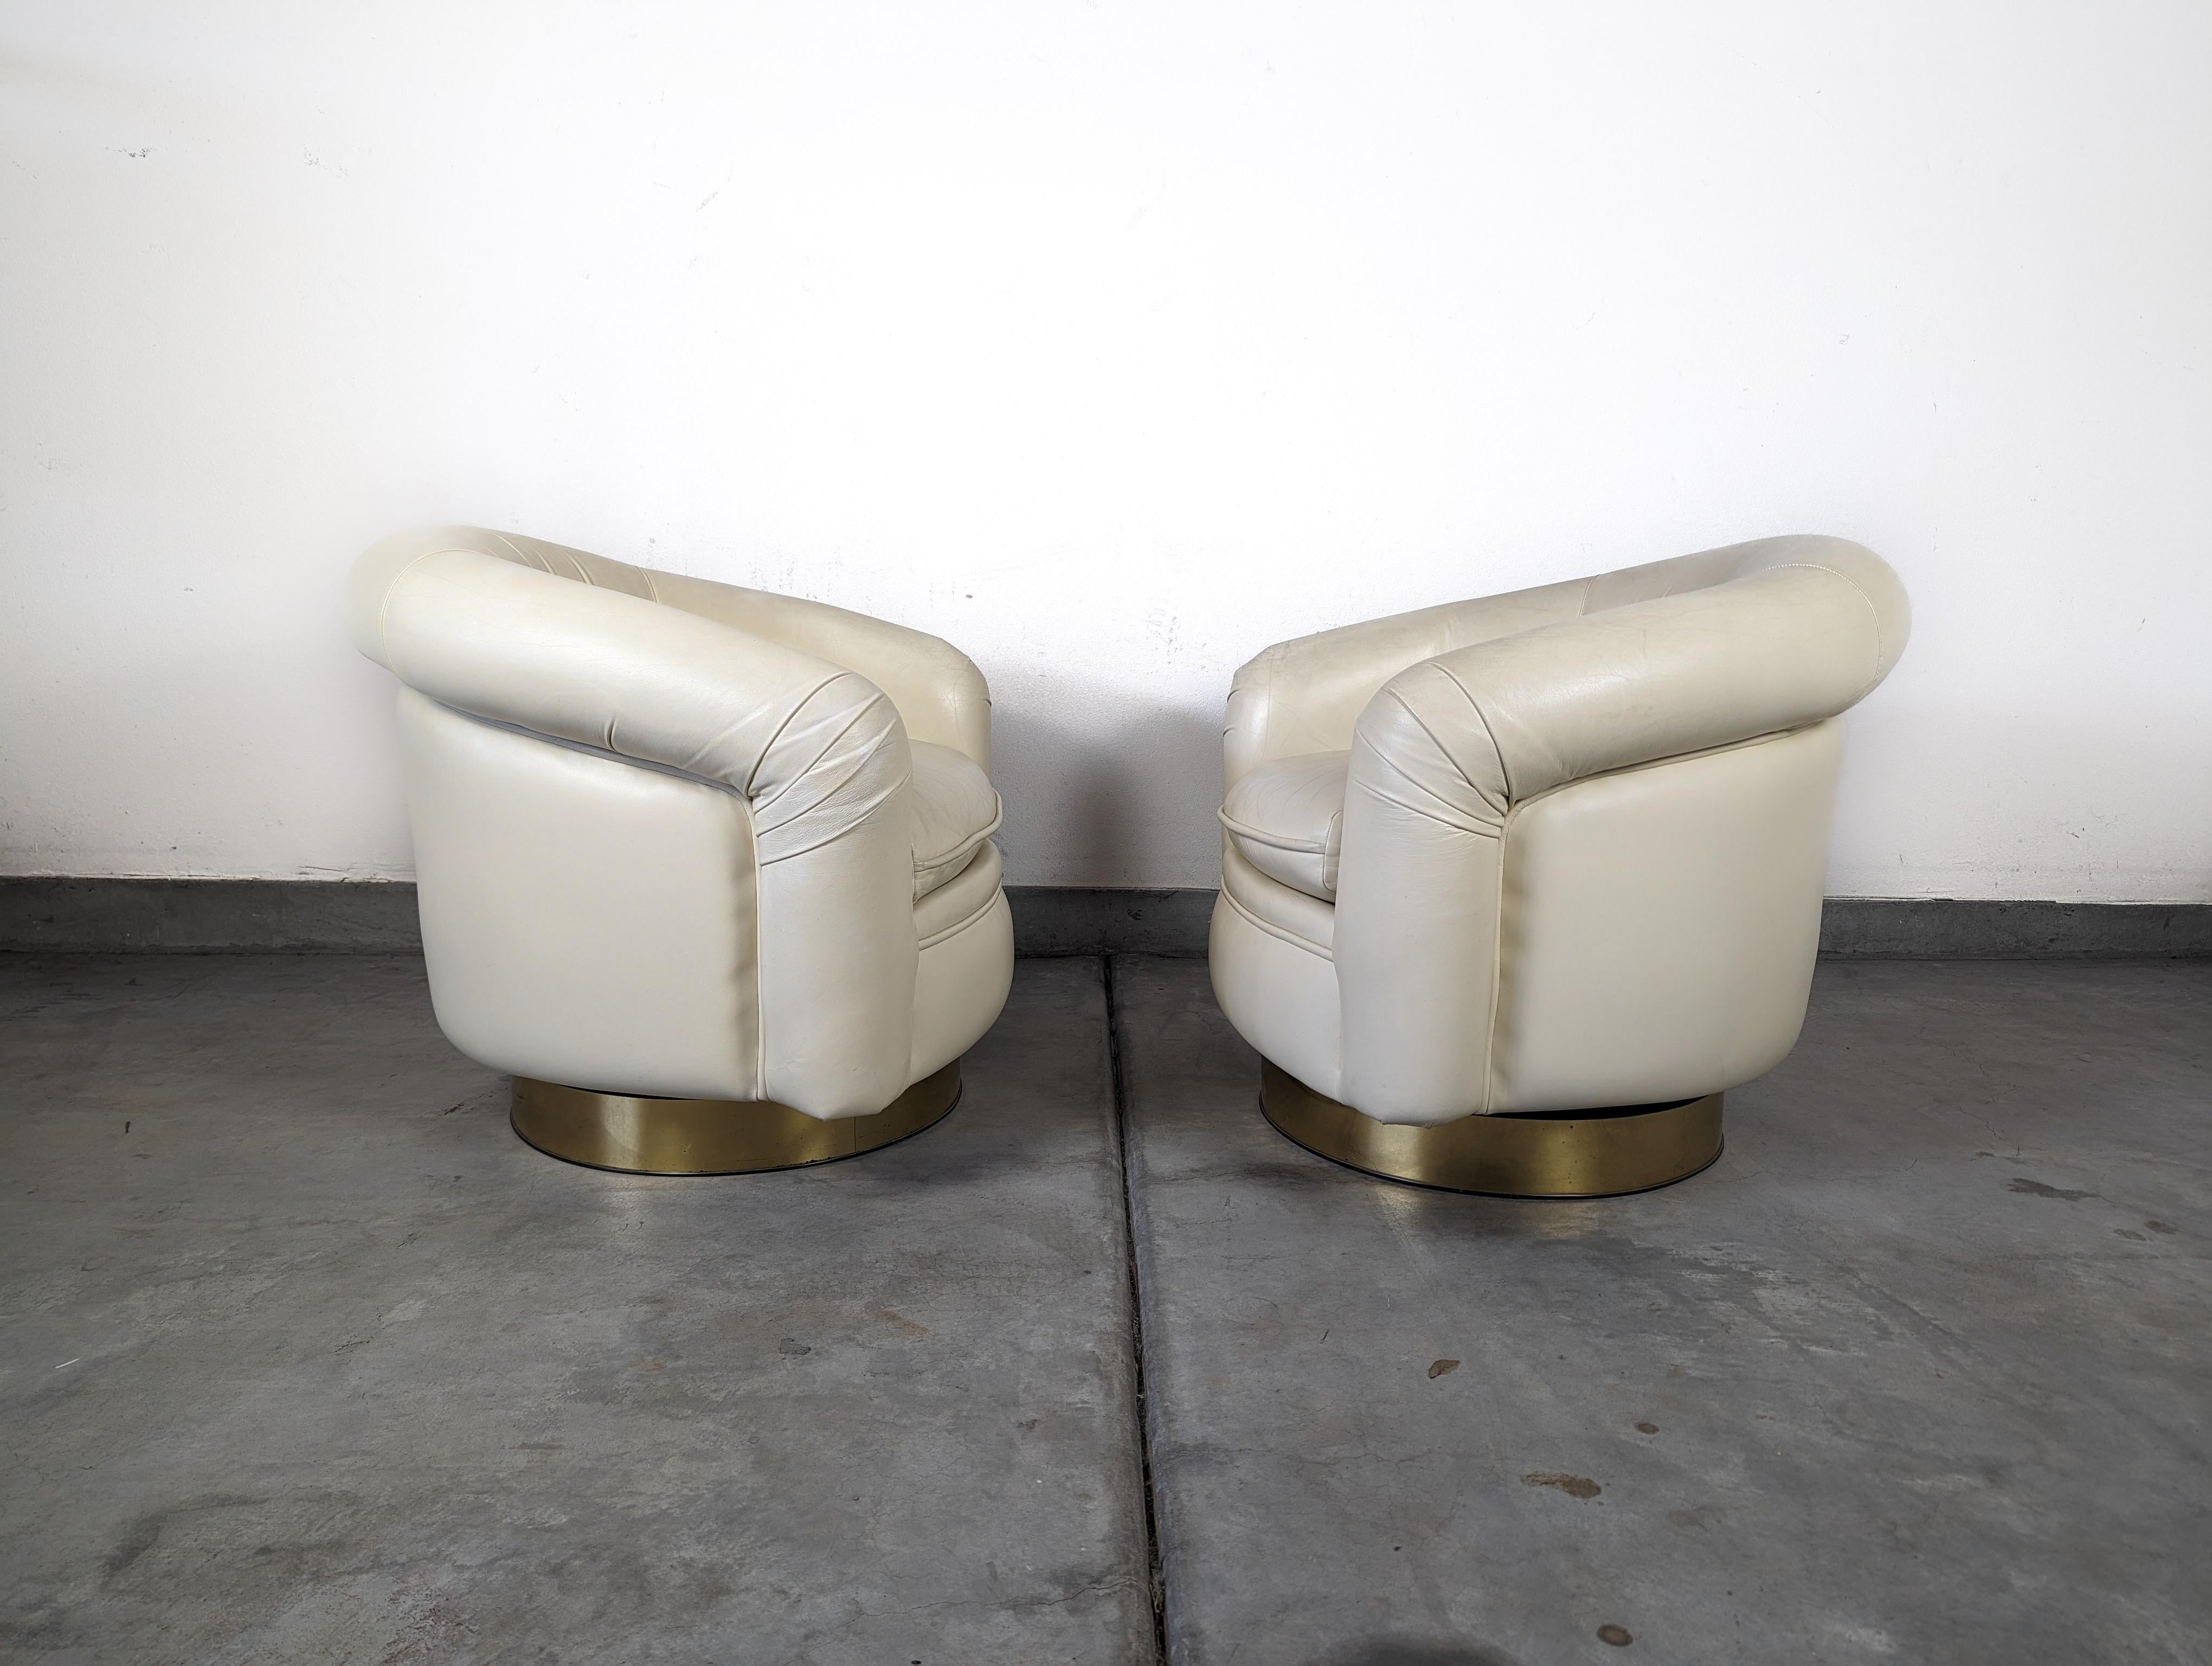 We are thrilled to present this stunning pair of vintage lounge chairs, designed by the renowned Milo Baughman for Thayer Coggin. Dating back to the 1970s, these chairs pay homage to the iconic Roxy chair design and exude an aura of timeless